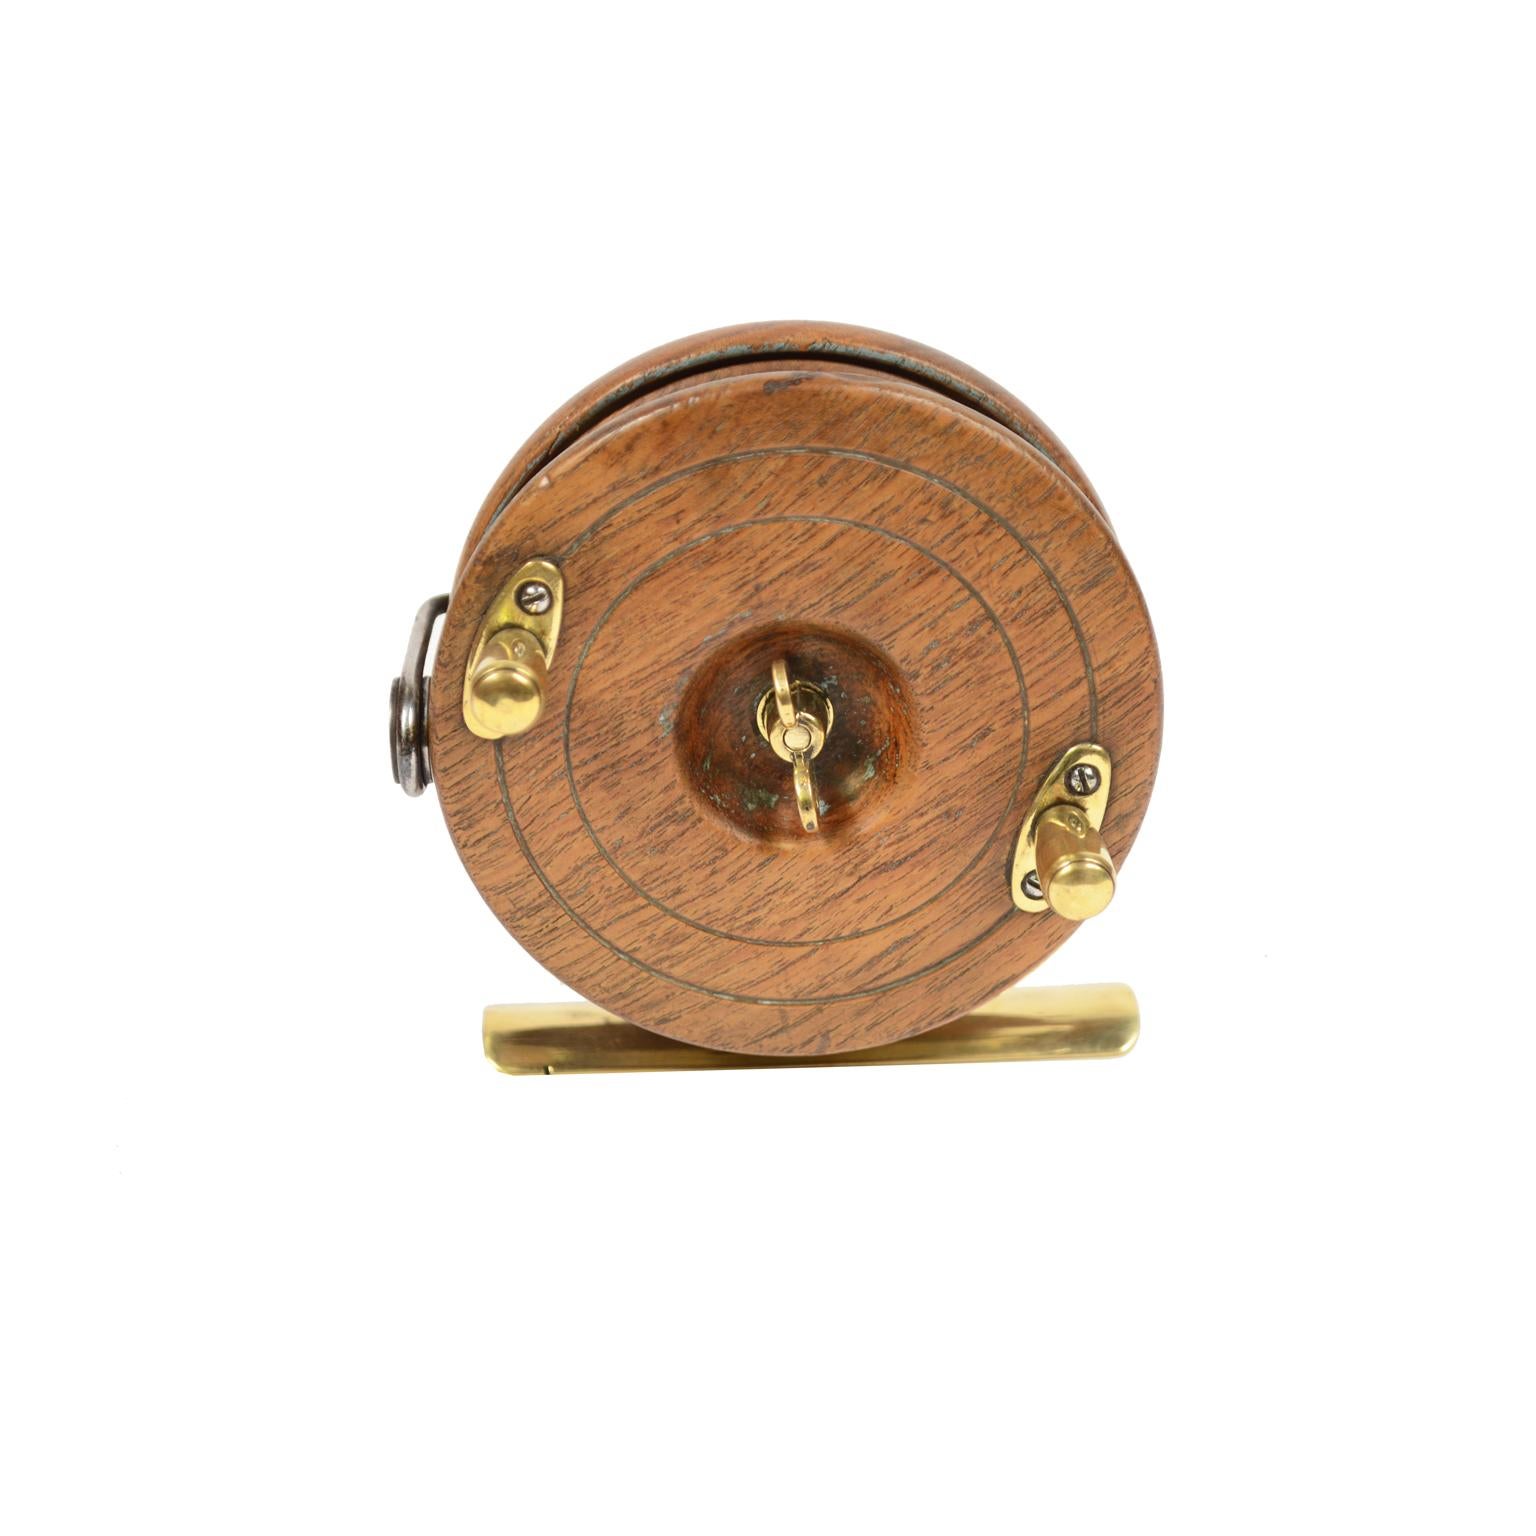 Fishing reel made of turned oak and brass, English manufacture of the early 1900s. Measures: Cm 11 x 11.5 - inches 4.33 x 4.52.
Shipping insured by Lloyd's London; it is available our free gift box (look at the last picture).